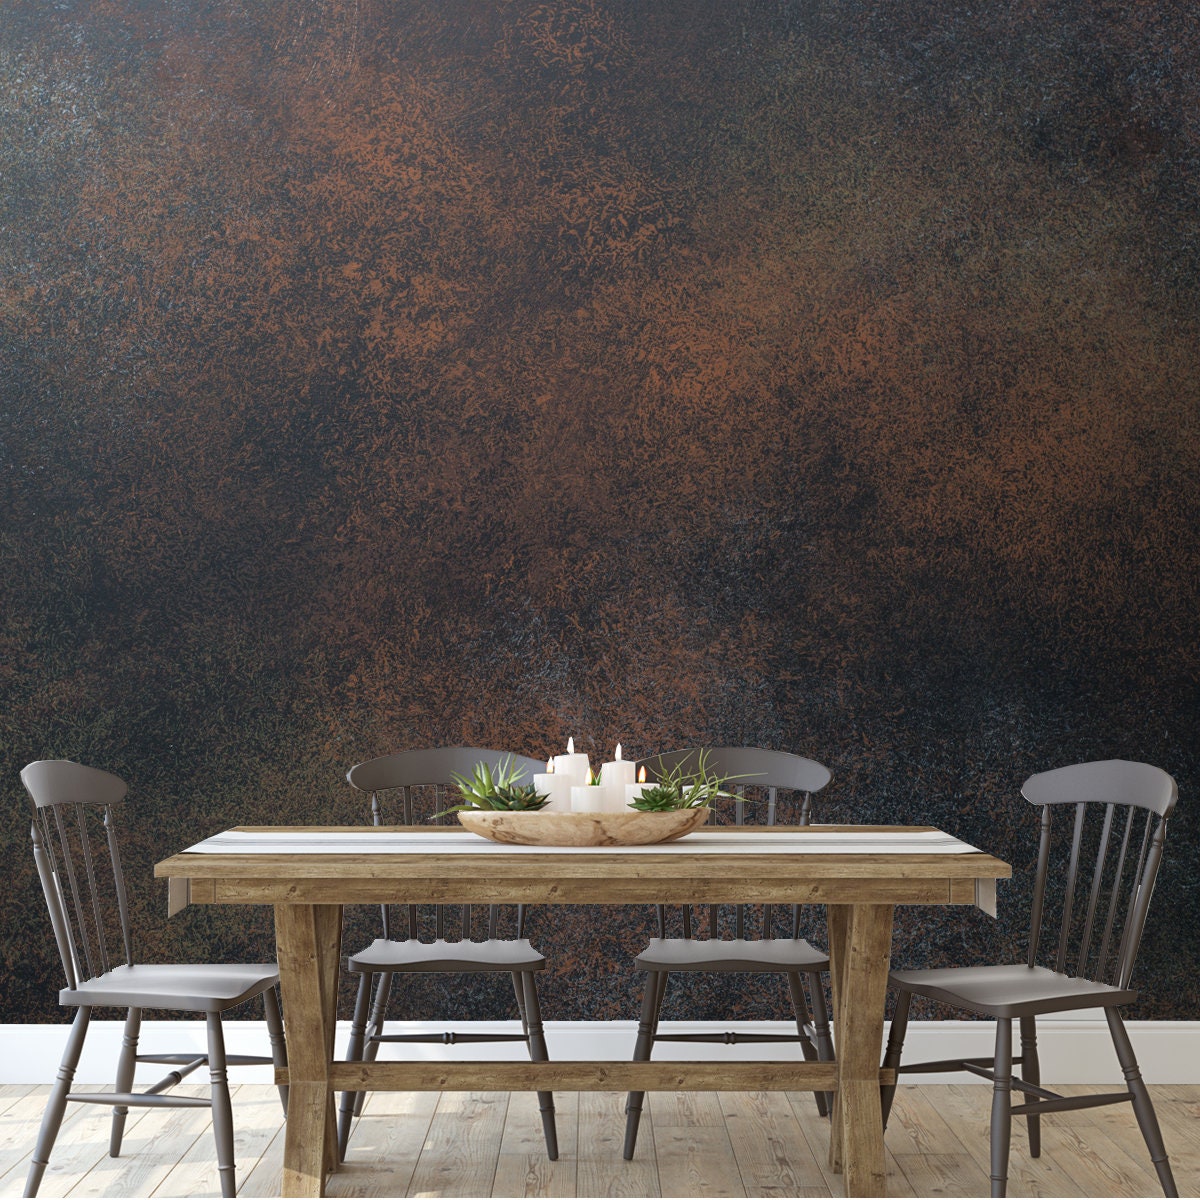 Empty Brown Rusty Stone or Metal Surface Texture Wallpaper Dining Room Mural